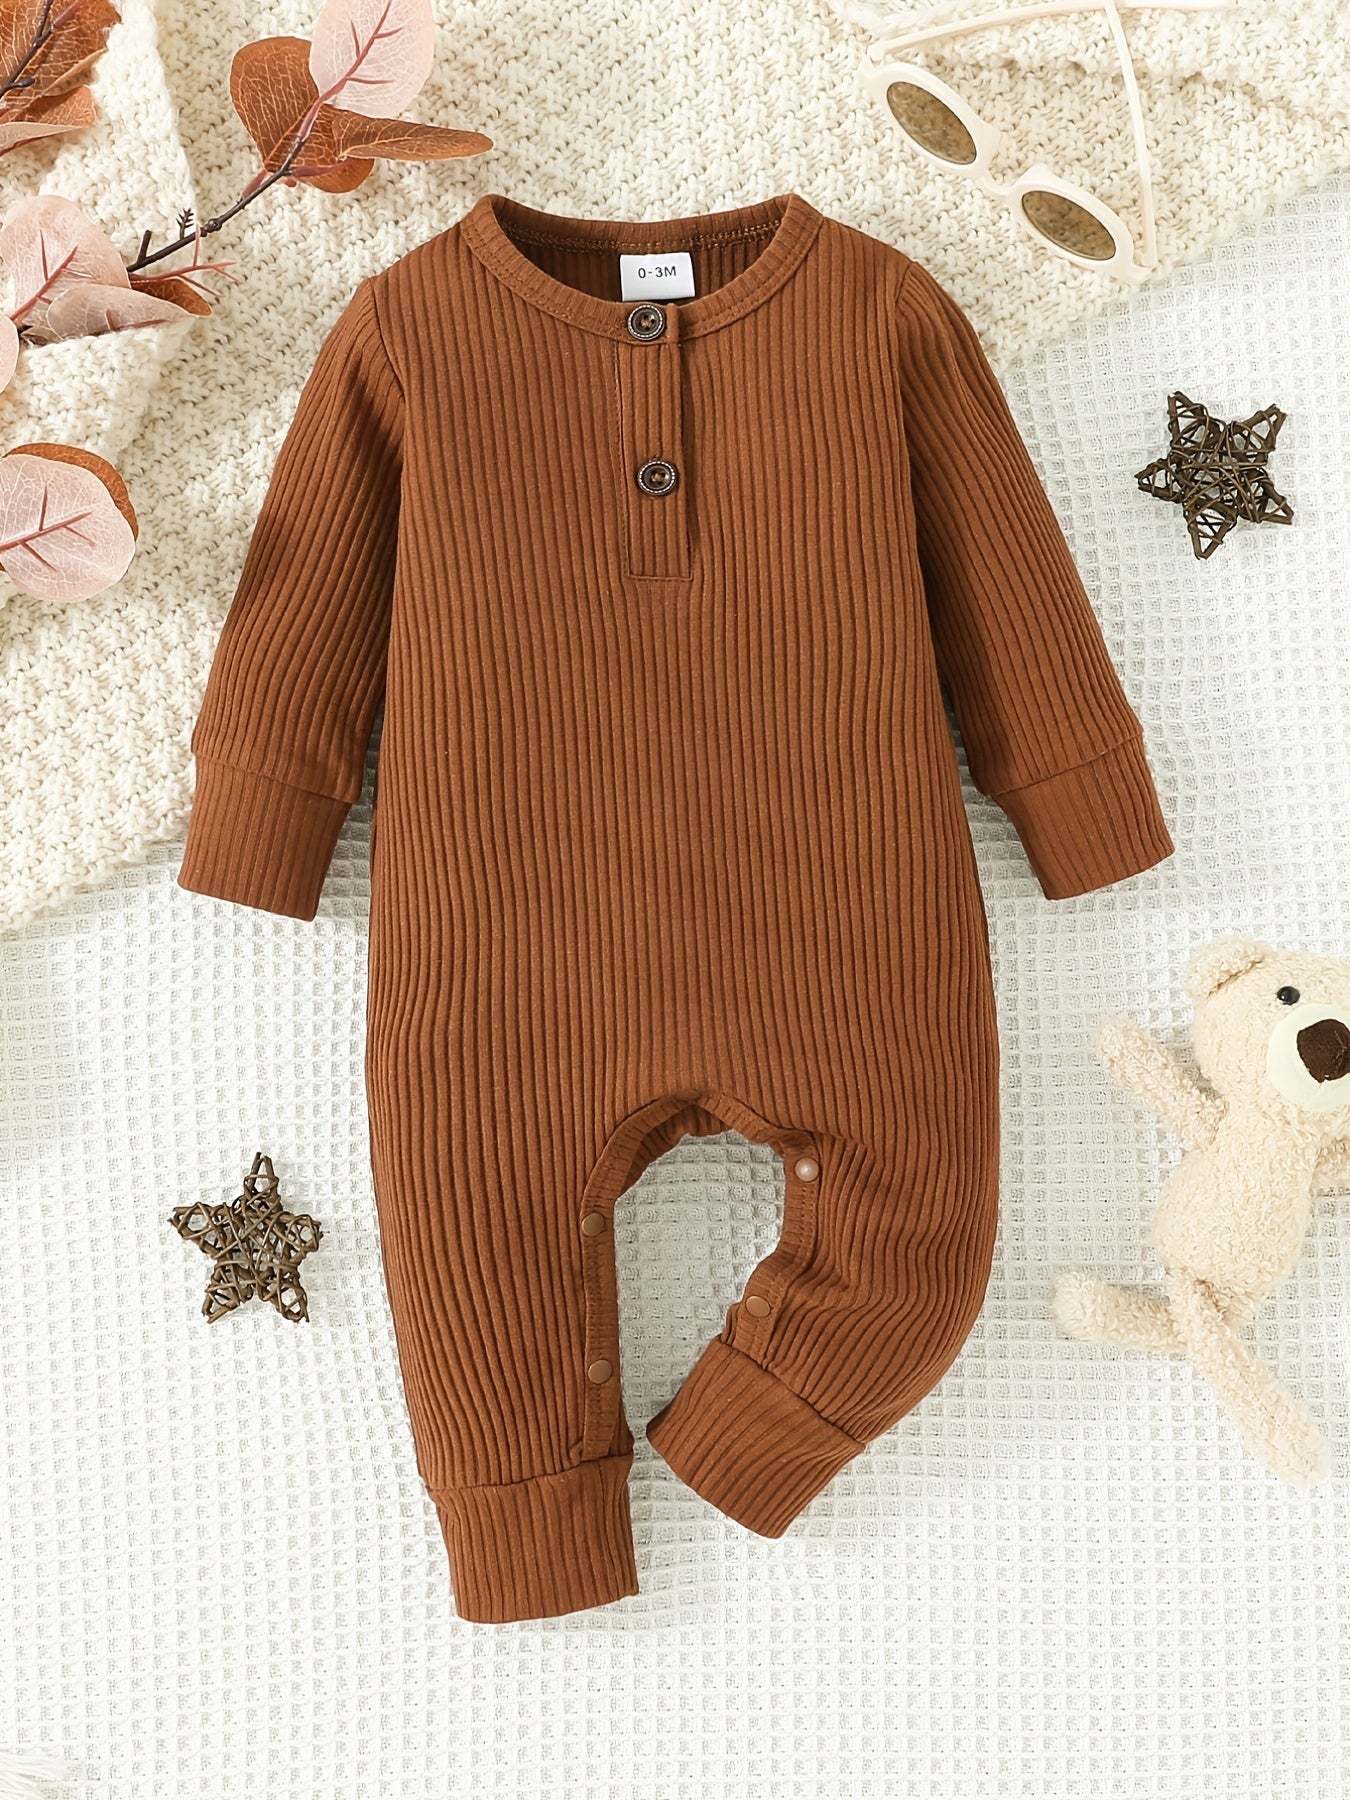 Newborn Baby Boys Knitted Romper, Casual Thermal Long Sleeve Button Down Jumpsuit For Winter, Dark Brown